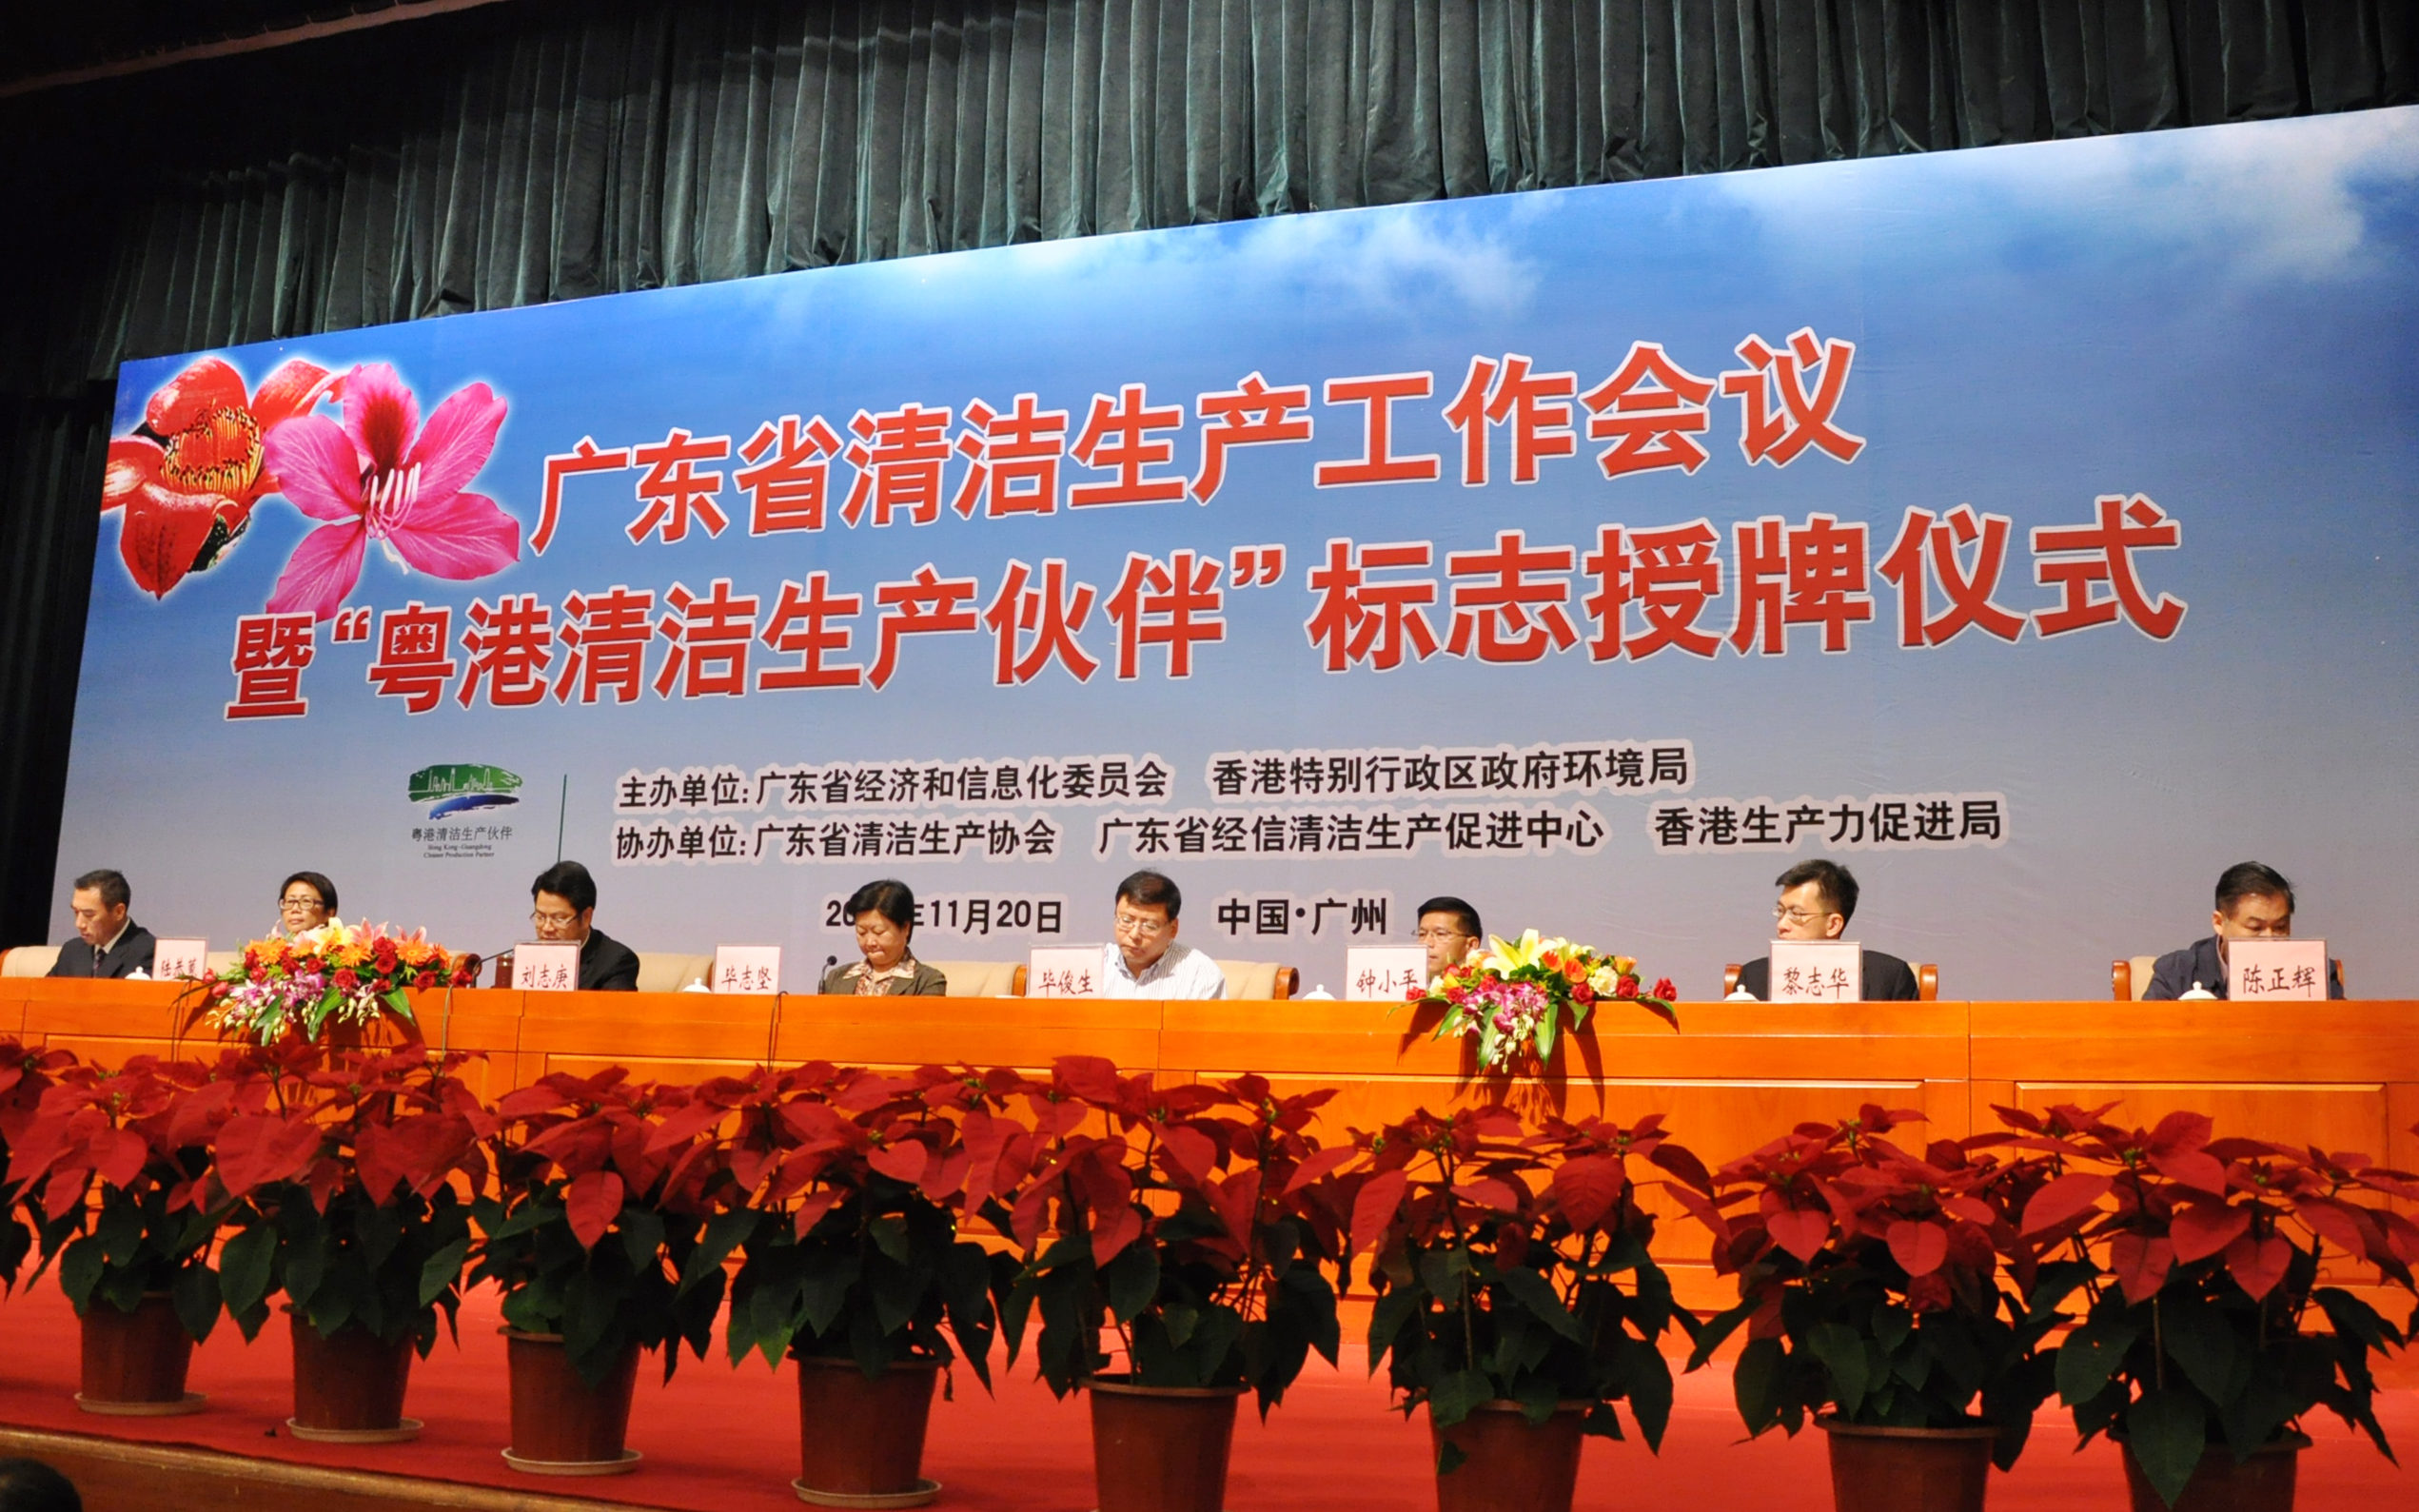 Officials from Hong Kong and Guangdong governments officiated the ceremony